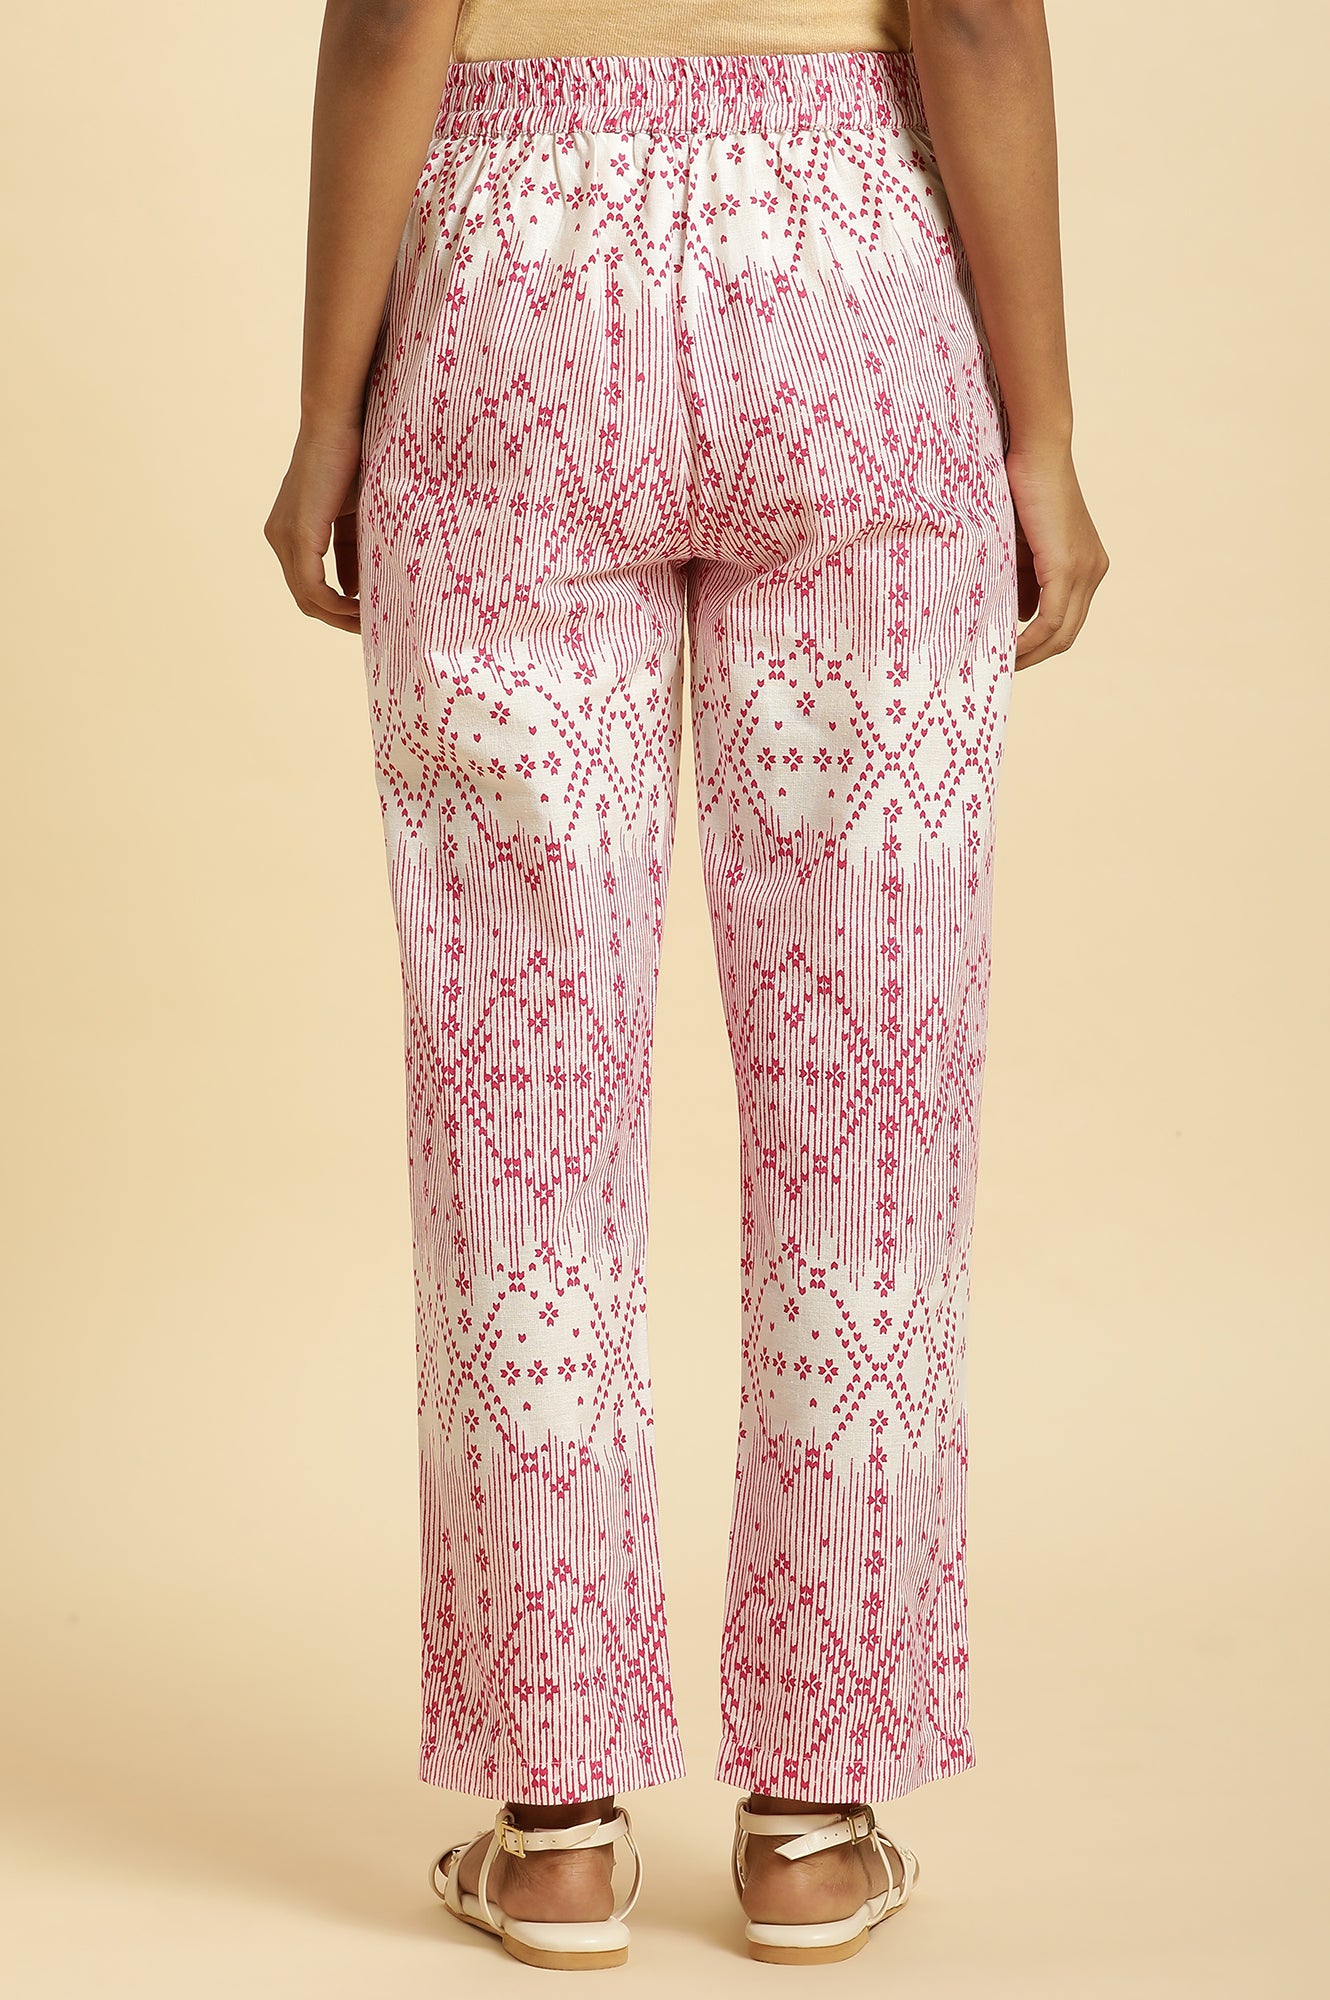 White Straight Pants With Pink Geometric Print